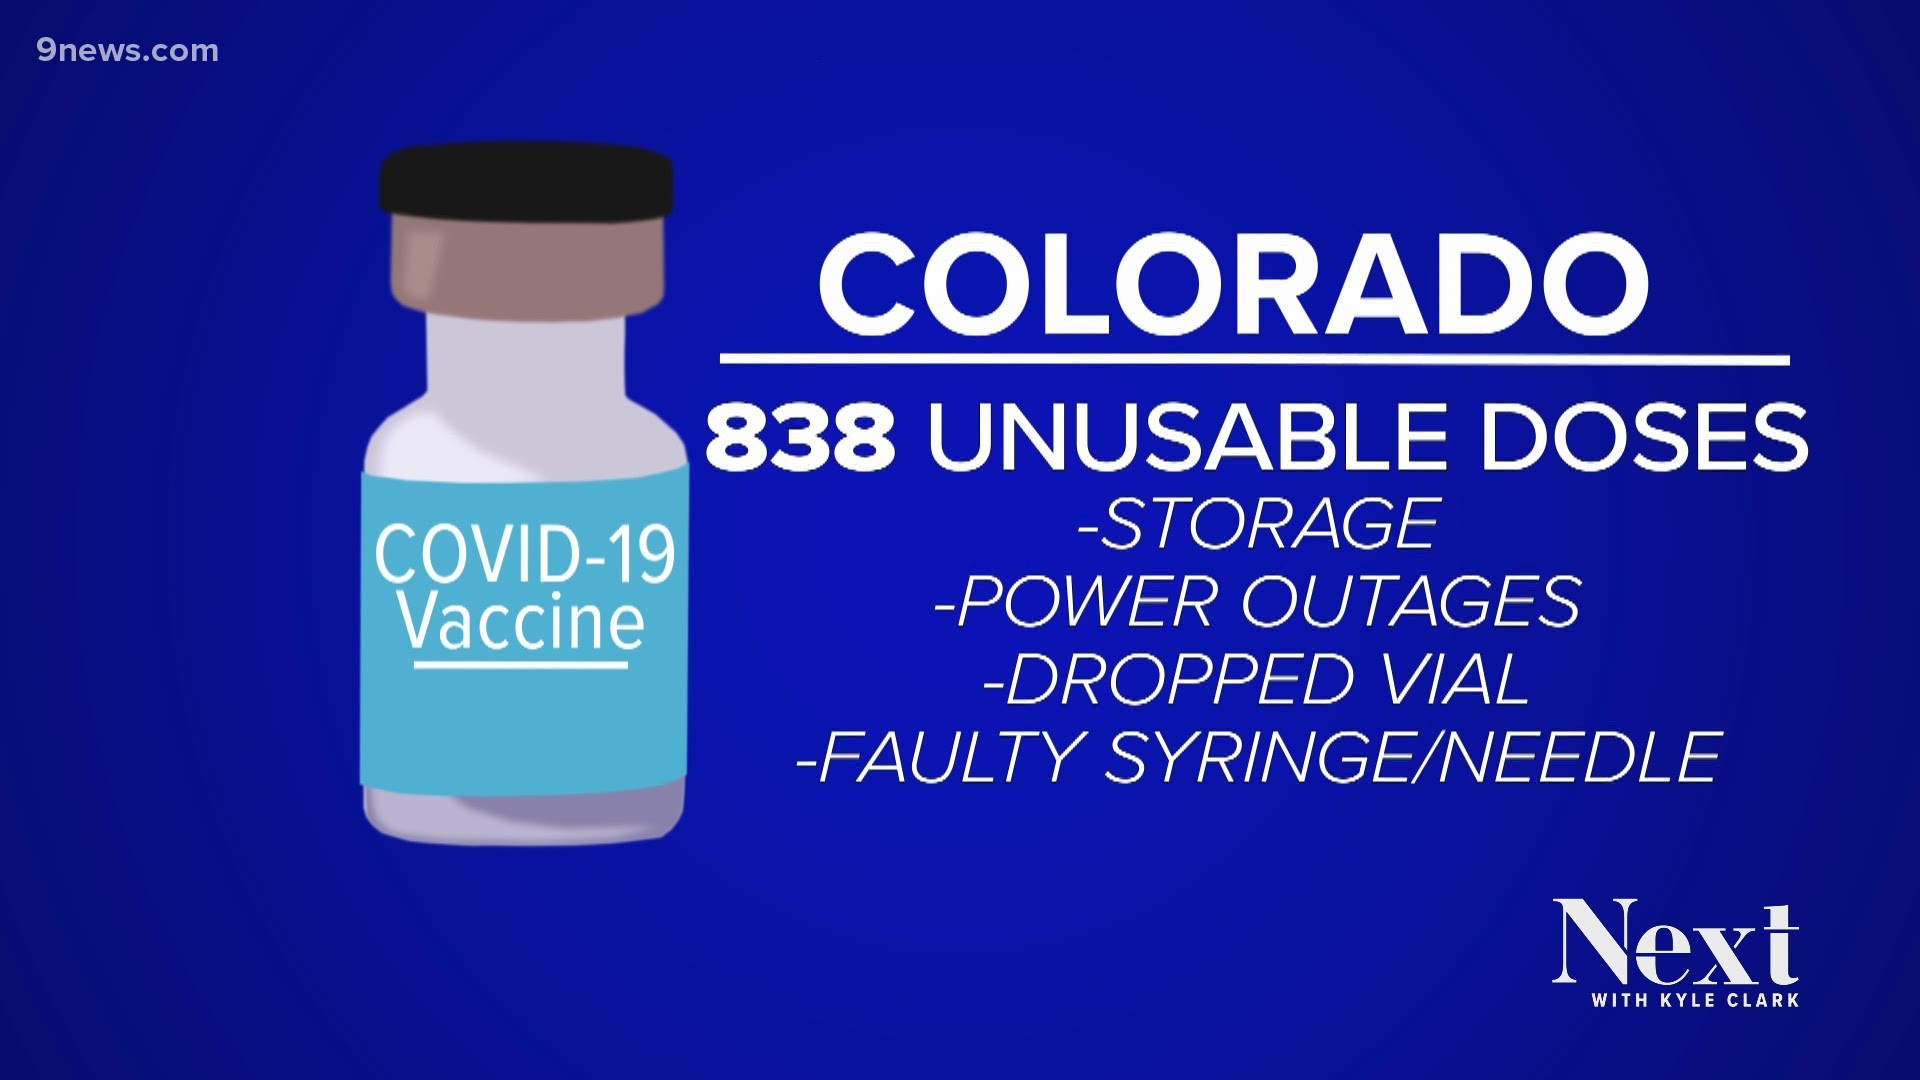 We spoke to the hospital systems in Colorado and found waste is actually fairly low when it comes to unused or expired vaccines.